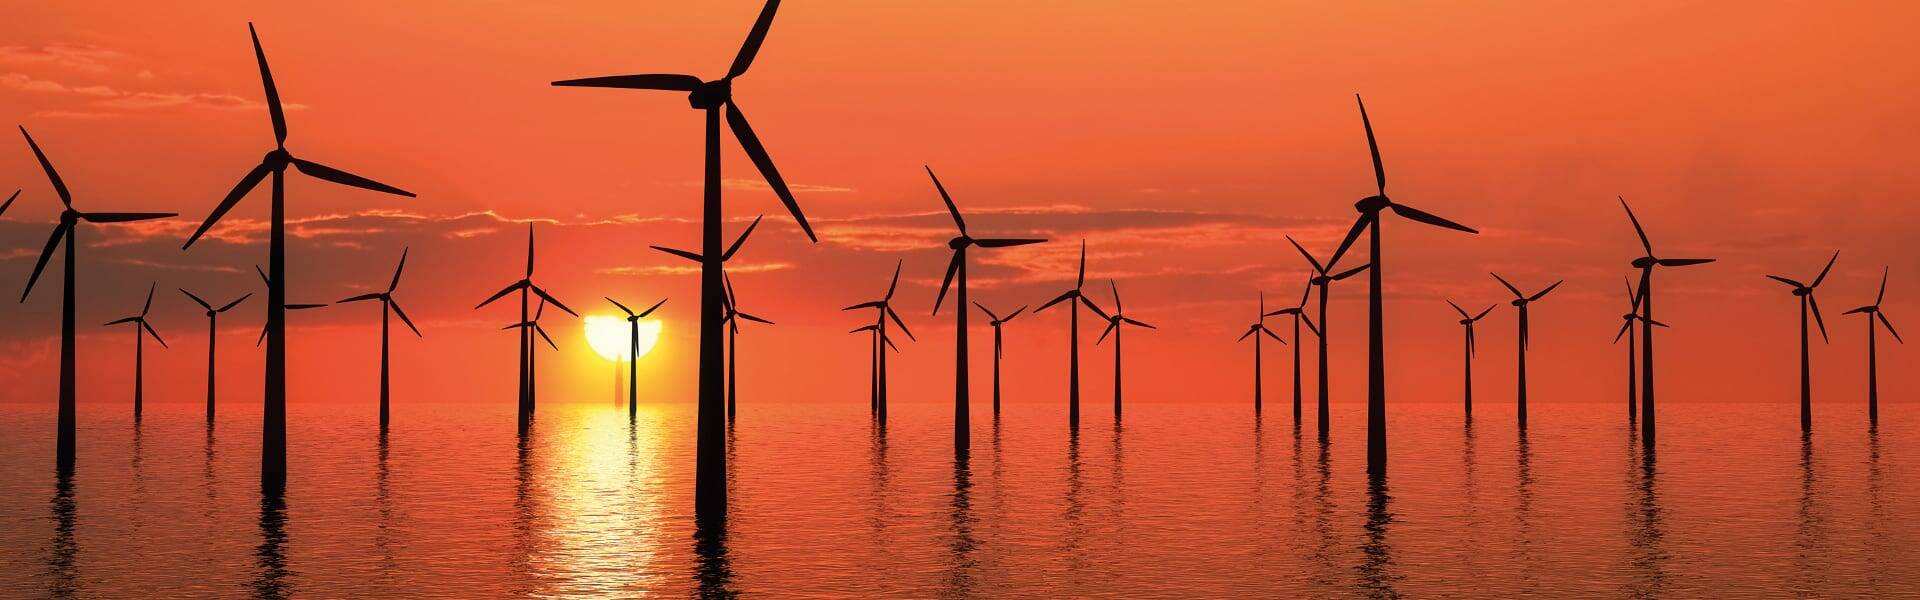 UK offshore wind market sees 9% growth